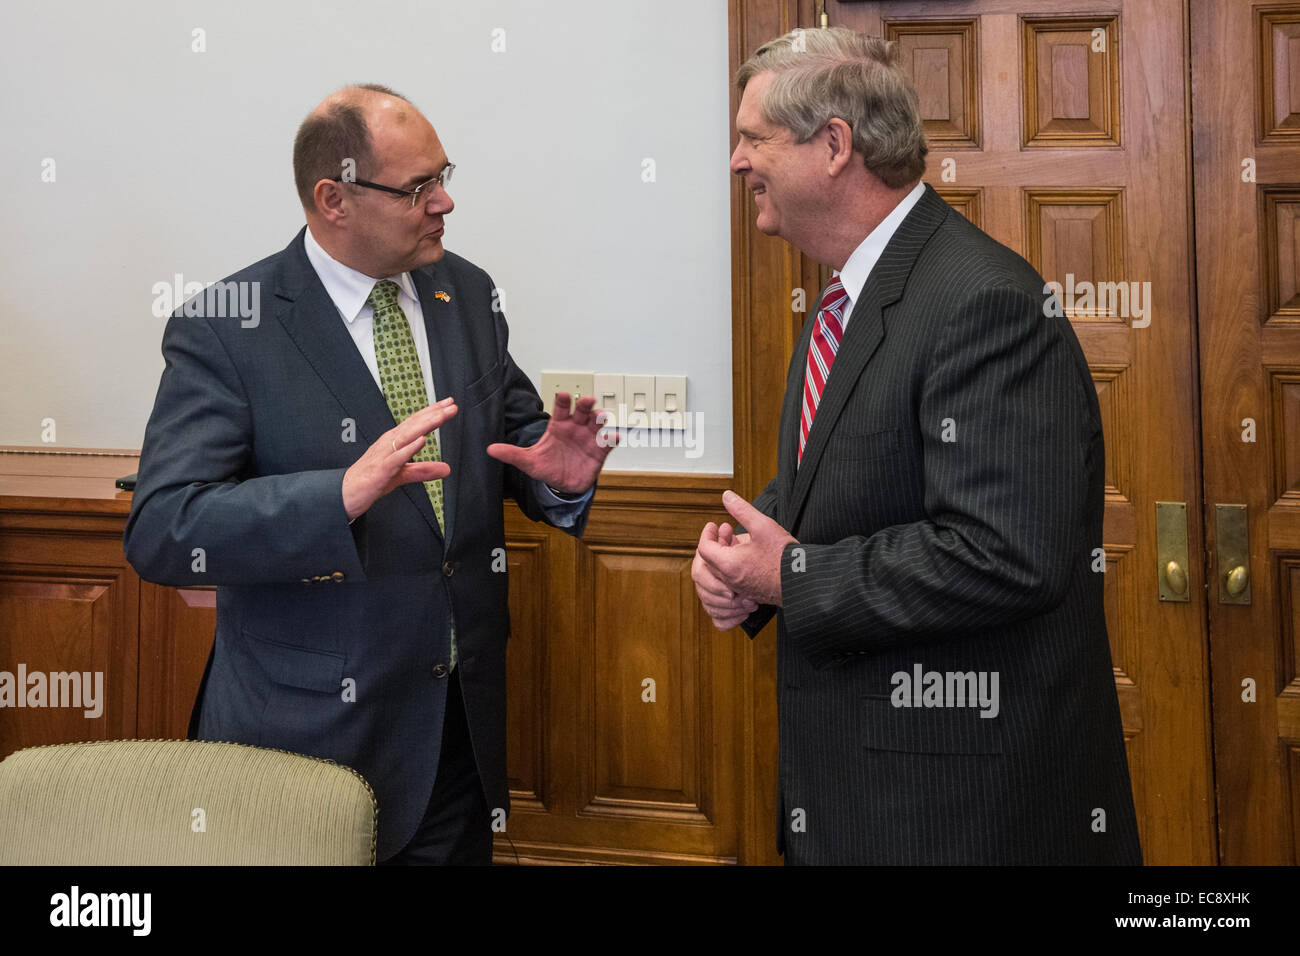 US Agriculture Secretary Tom Vilsack talks with Christian Schmidt, Agriculture Minister of Germany following their meeting at the United States Department of Agriculture December 10, 2014 in Washington, DC. Stock Photo